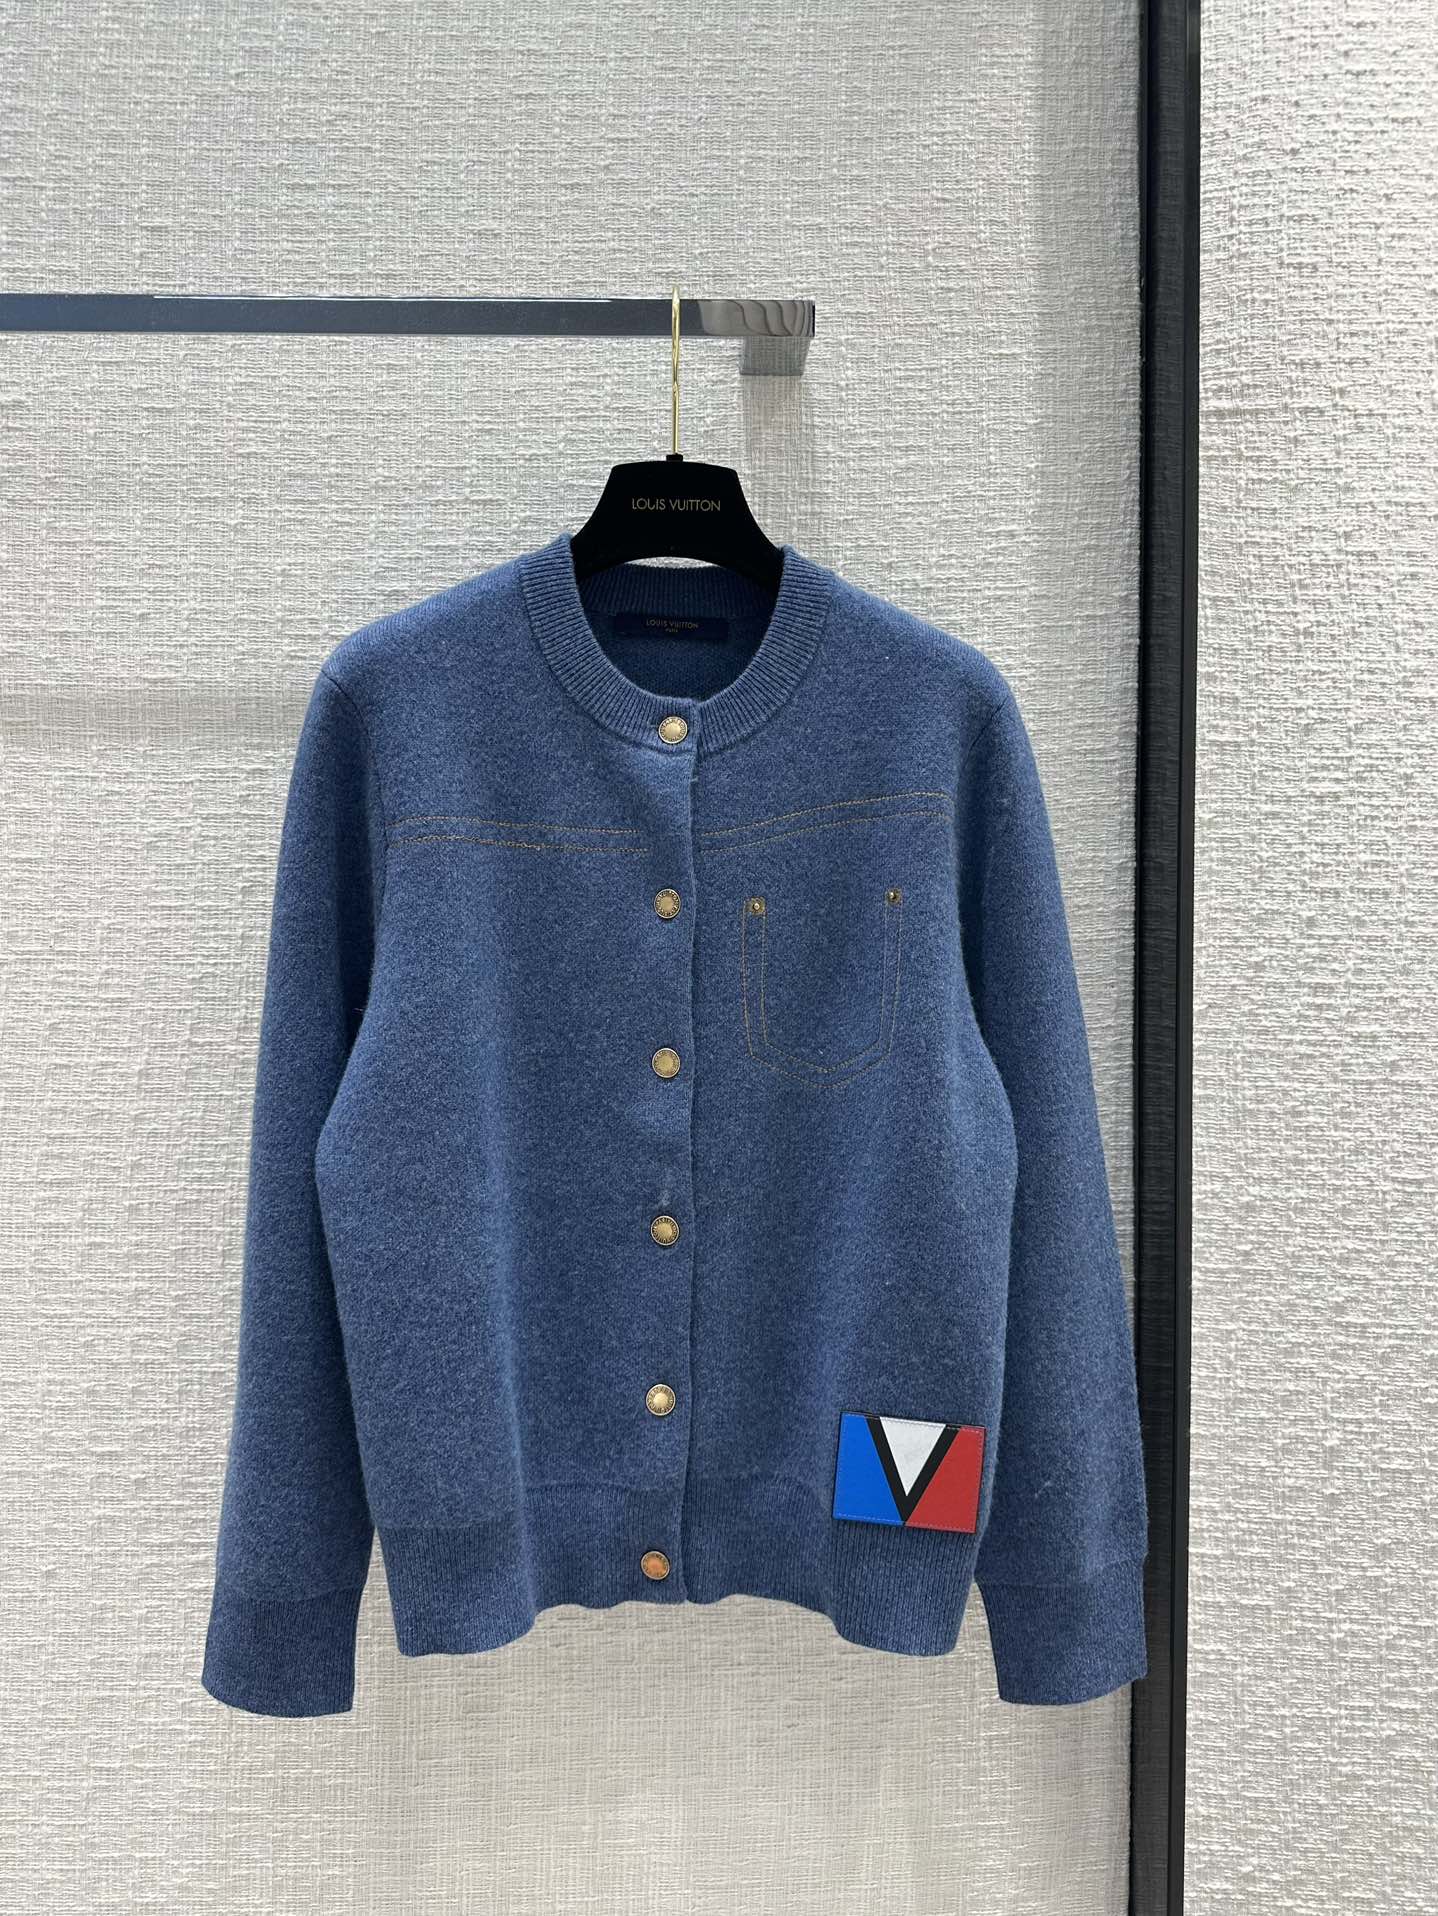 Louis Vuitton Clothing Cardigans Knit Sweater Blue Denim White Yellow Cashmere Knitting Fall/Winter Collection Casual